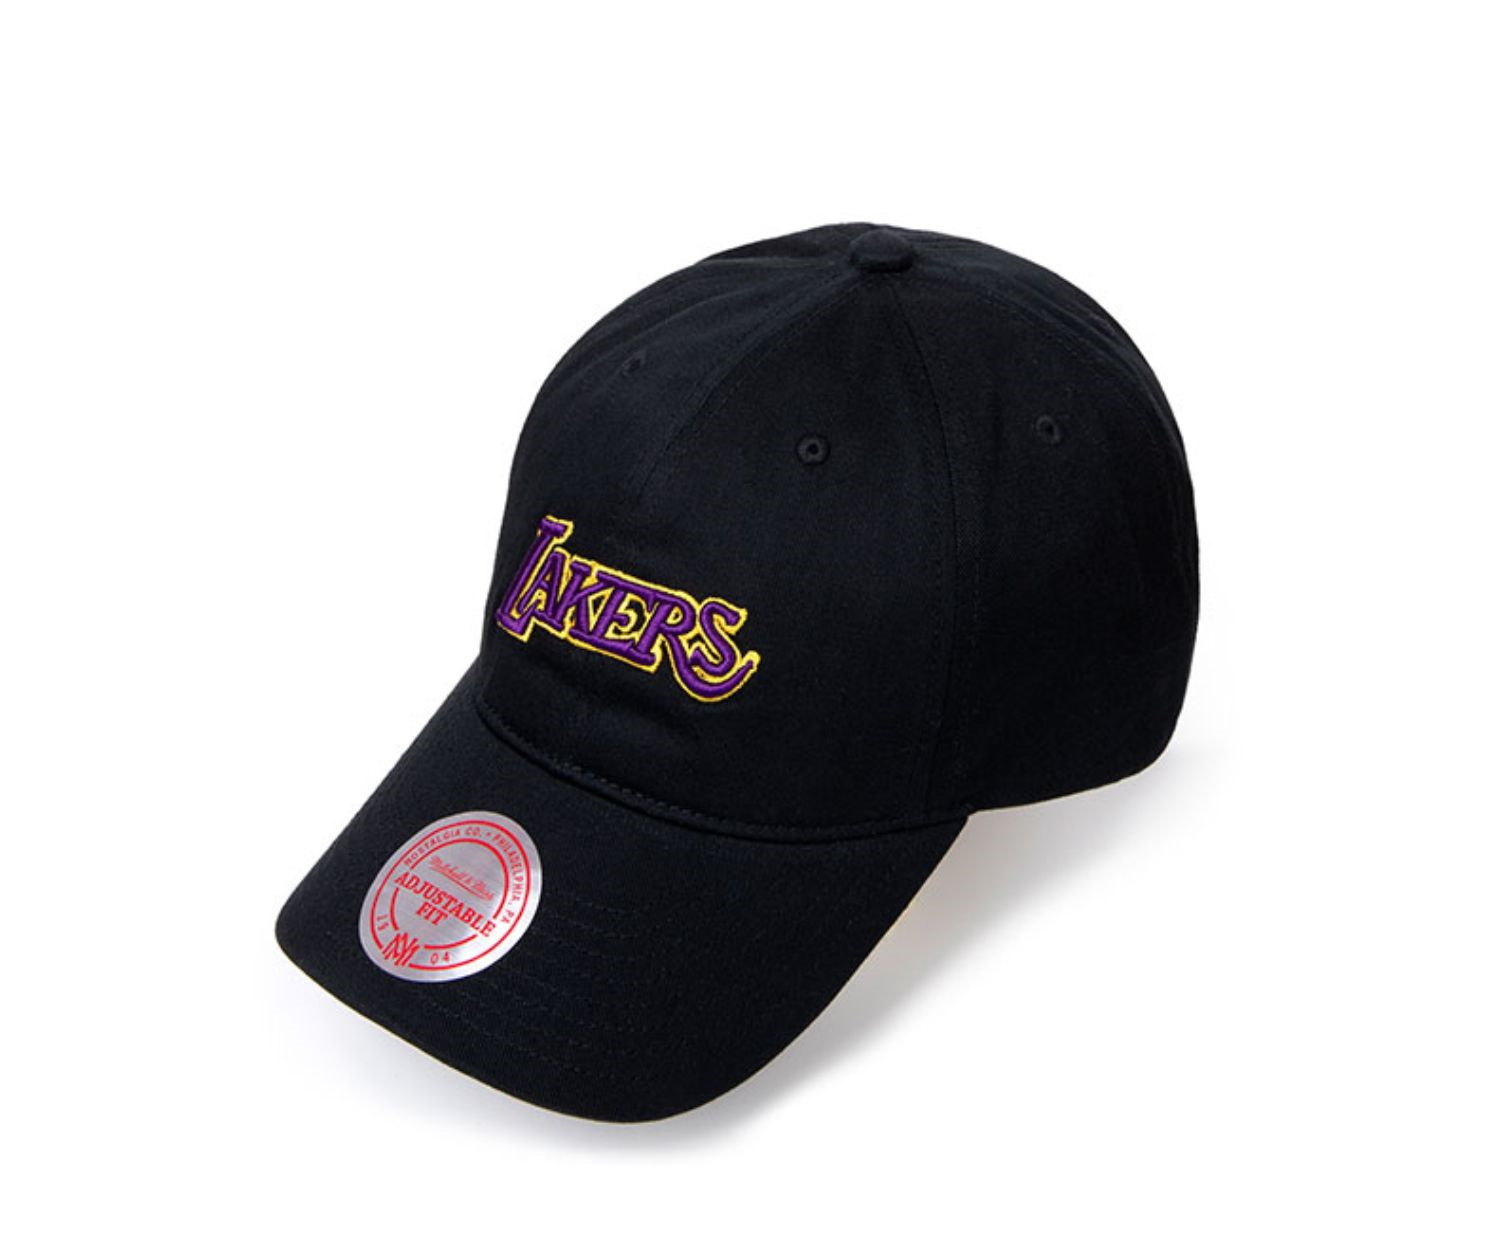 2020 AAPE x Mitchell Ness Lakers Black Cap